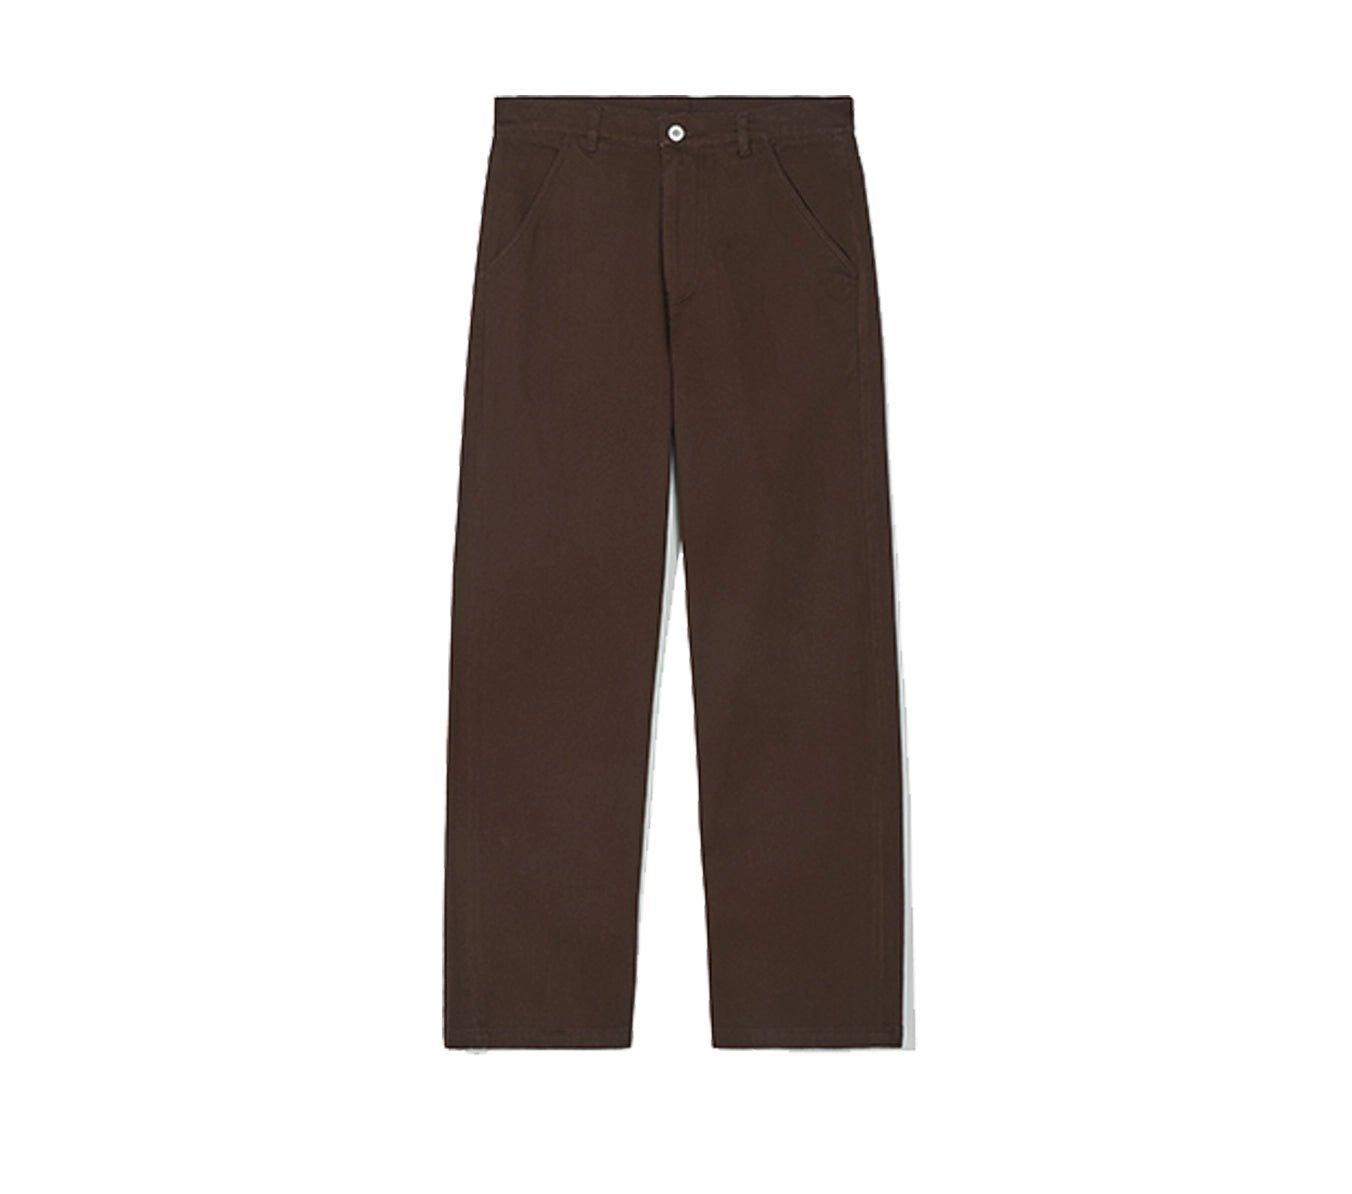 Partimento Wasing Cotton Twill Pants / Brown - SUPERCONSCIOUS BERLIN